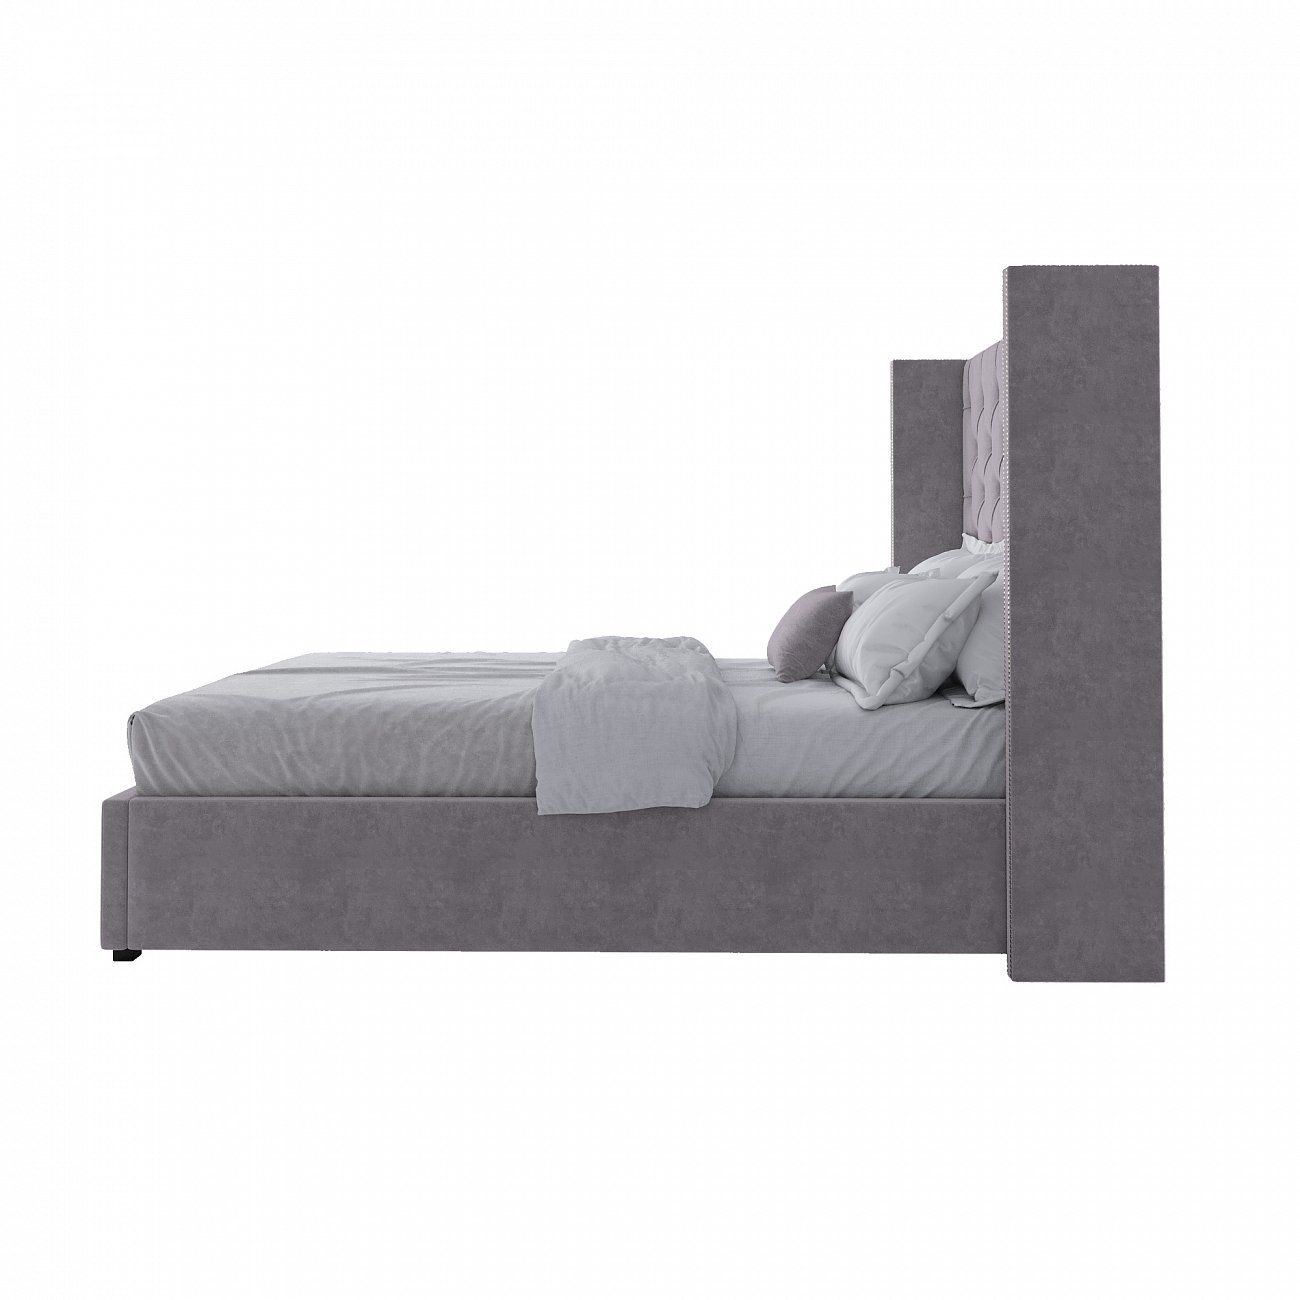 Teenage bed 140x200 cm gray-beige with carnations and carriage screed Wing